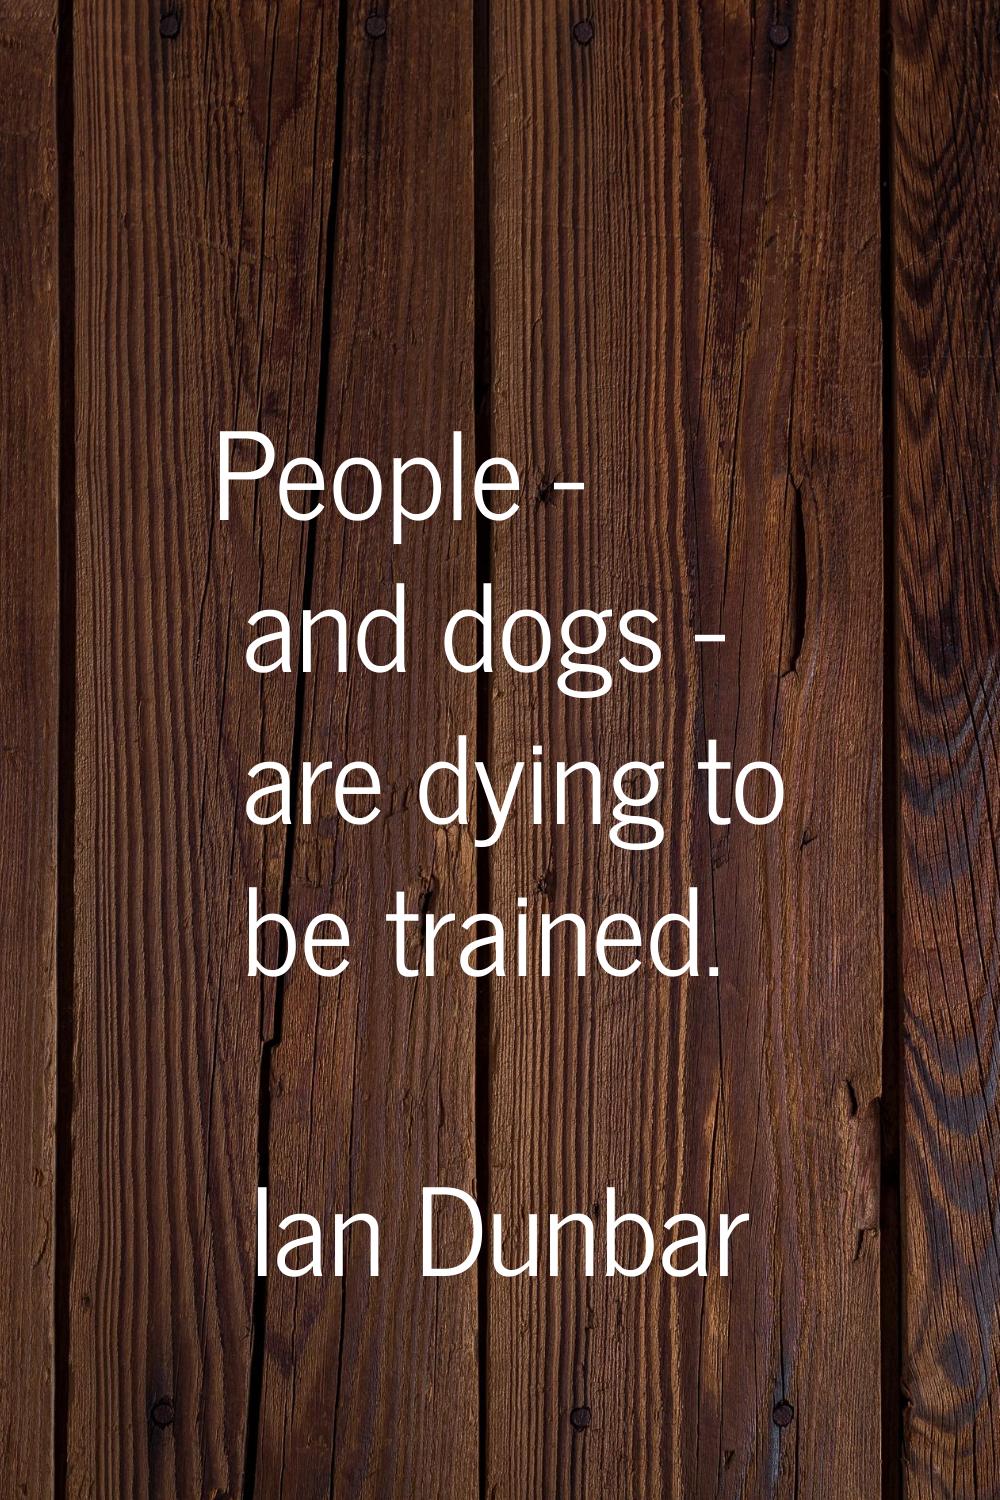 People - and dogs - are dying to be trained.